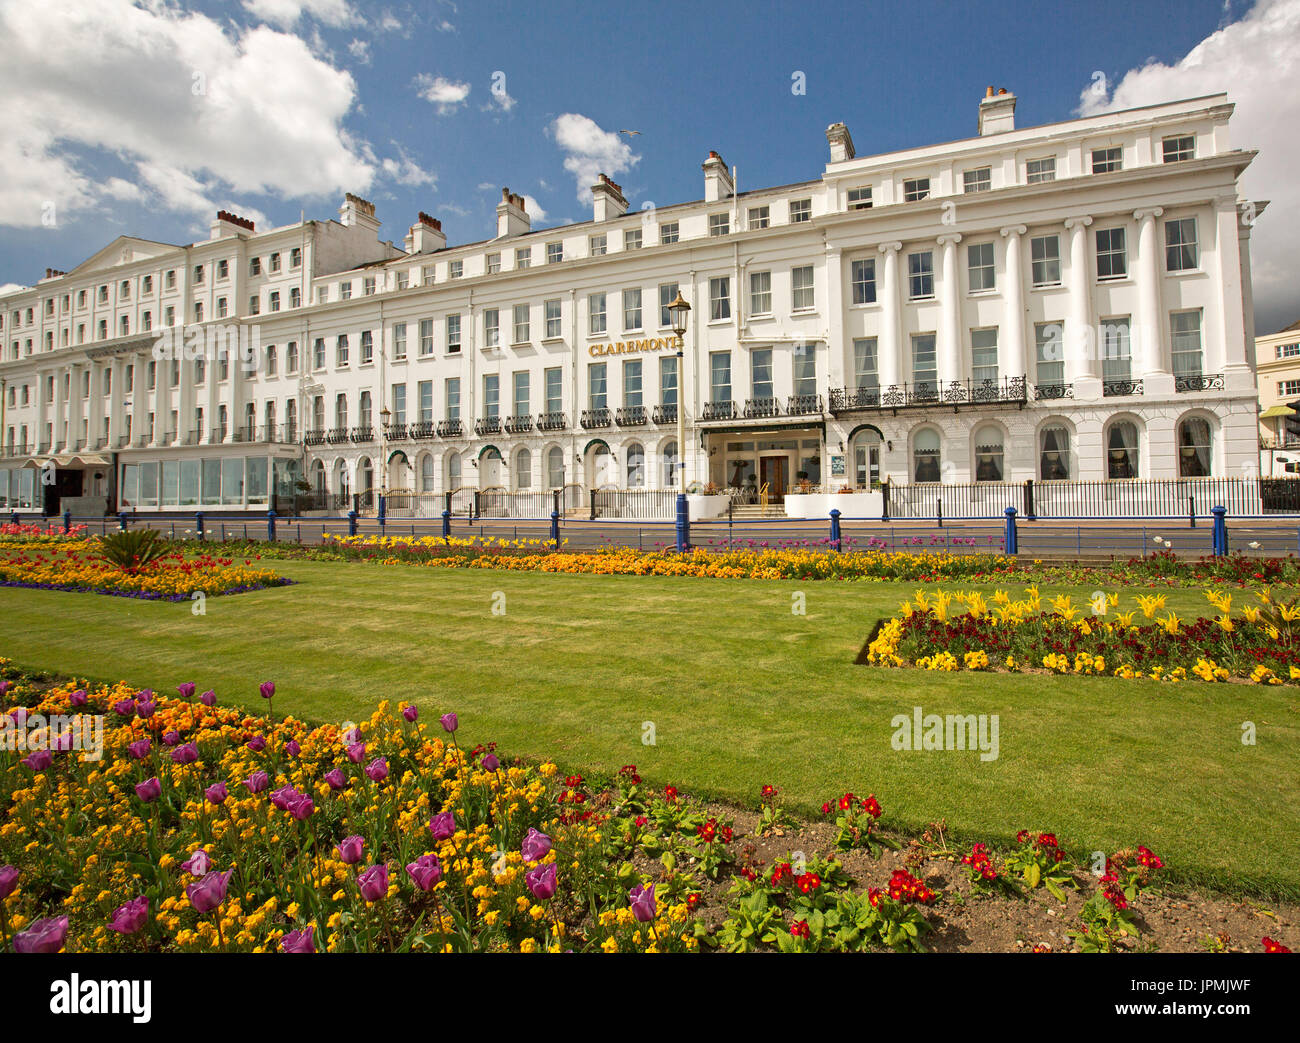 Large and imposing Claremont Hotel with colourful gardens dominated by tulips in foreground under blue sky at Eastbourne, England Stock Photo